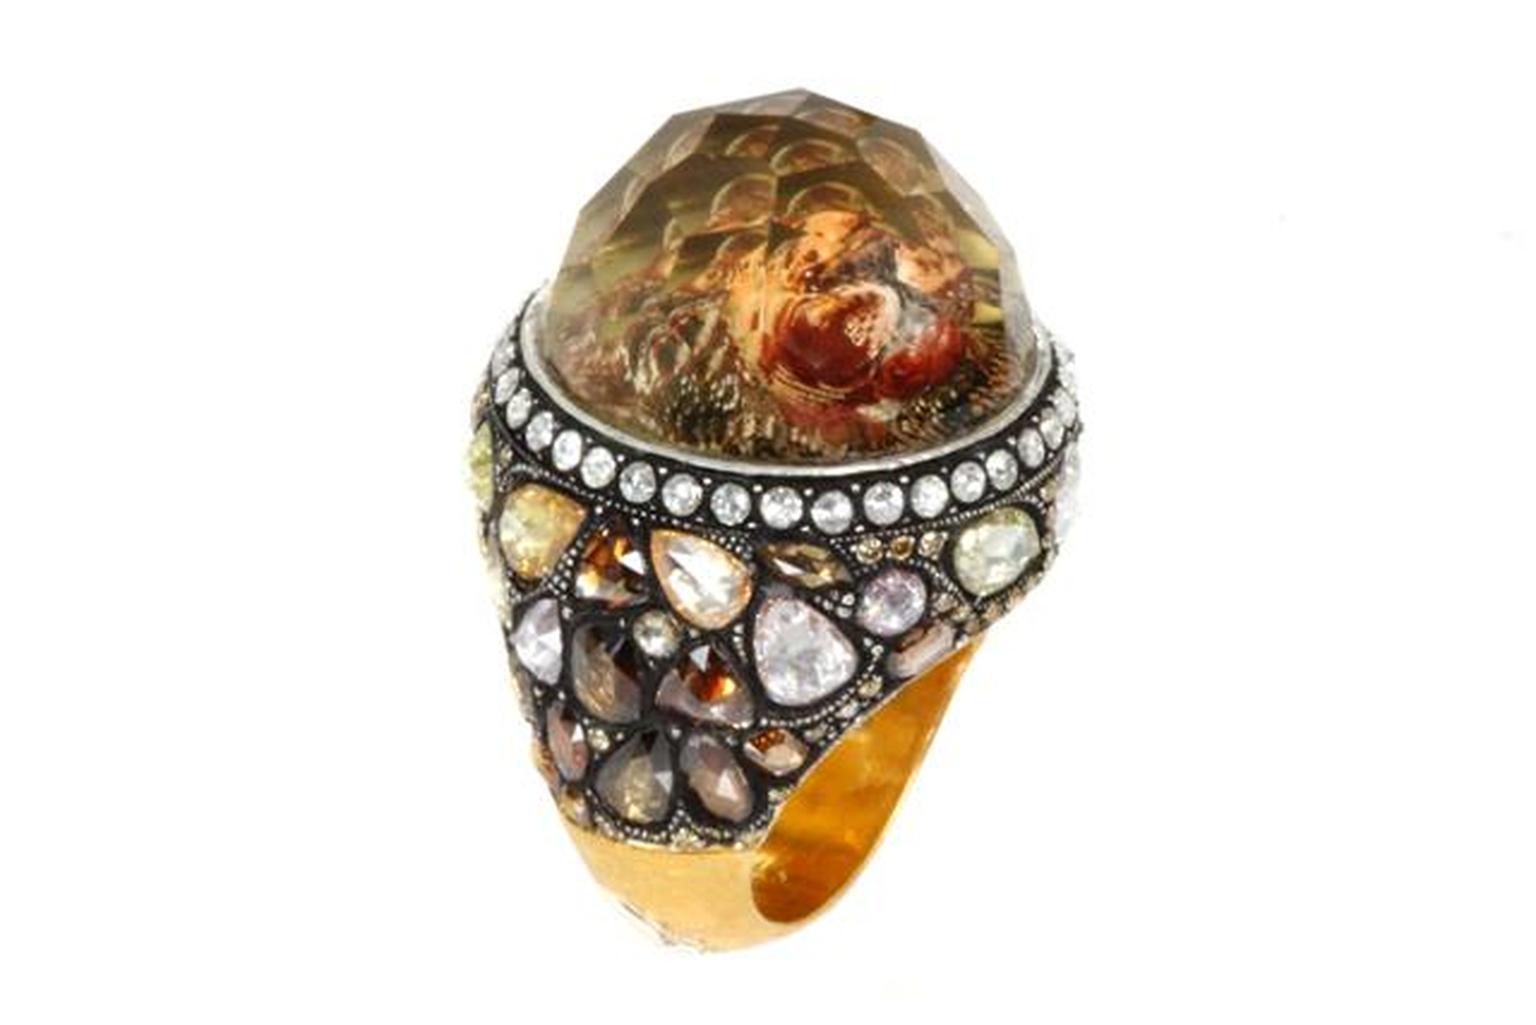 Sevan Biçakçi one-of-a-kind gold and sterling silver ring featuring an inversely carved topaz centre stone reflecting a lion surrounded by coloured diamonds.